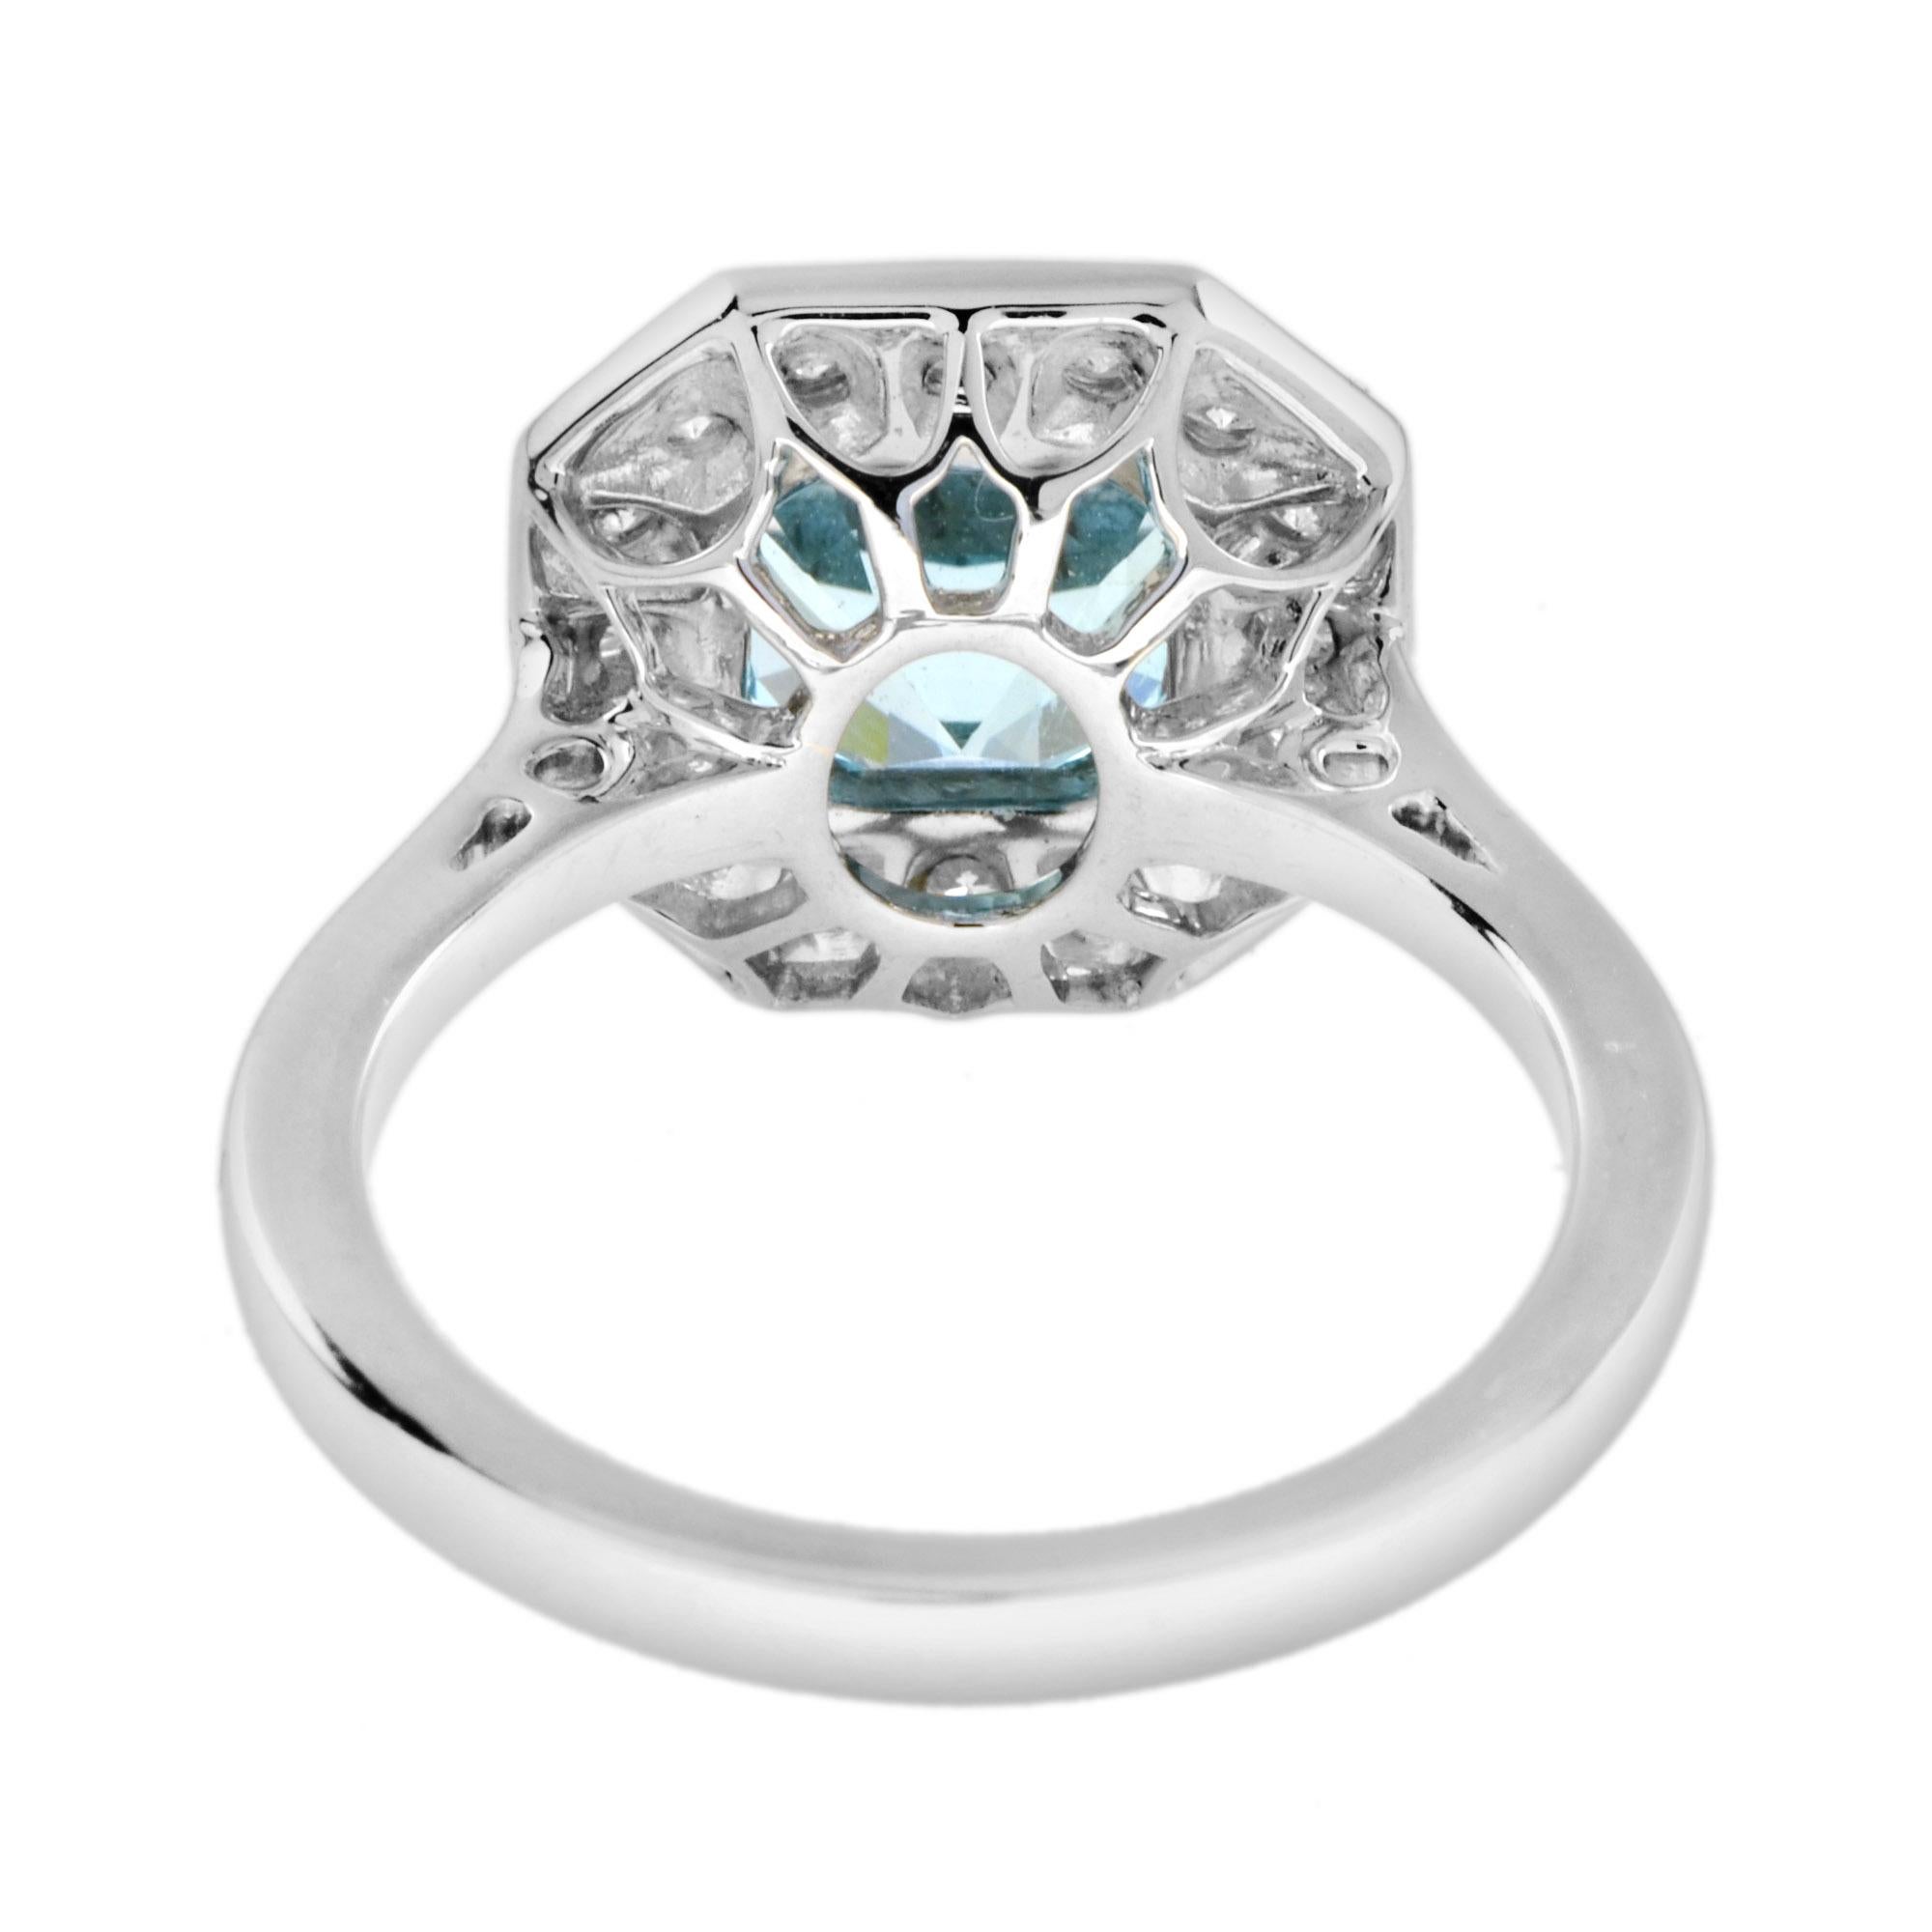 For Sale:  2.7 Ct. Blue Topaz and Diamond Art Deco Style Halo Engagement Ring in 14K Gold 5